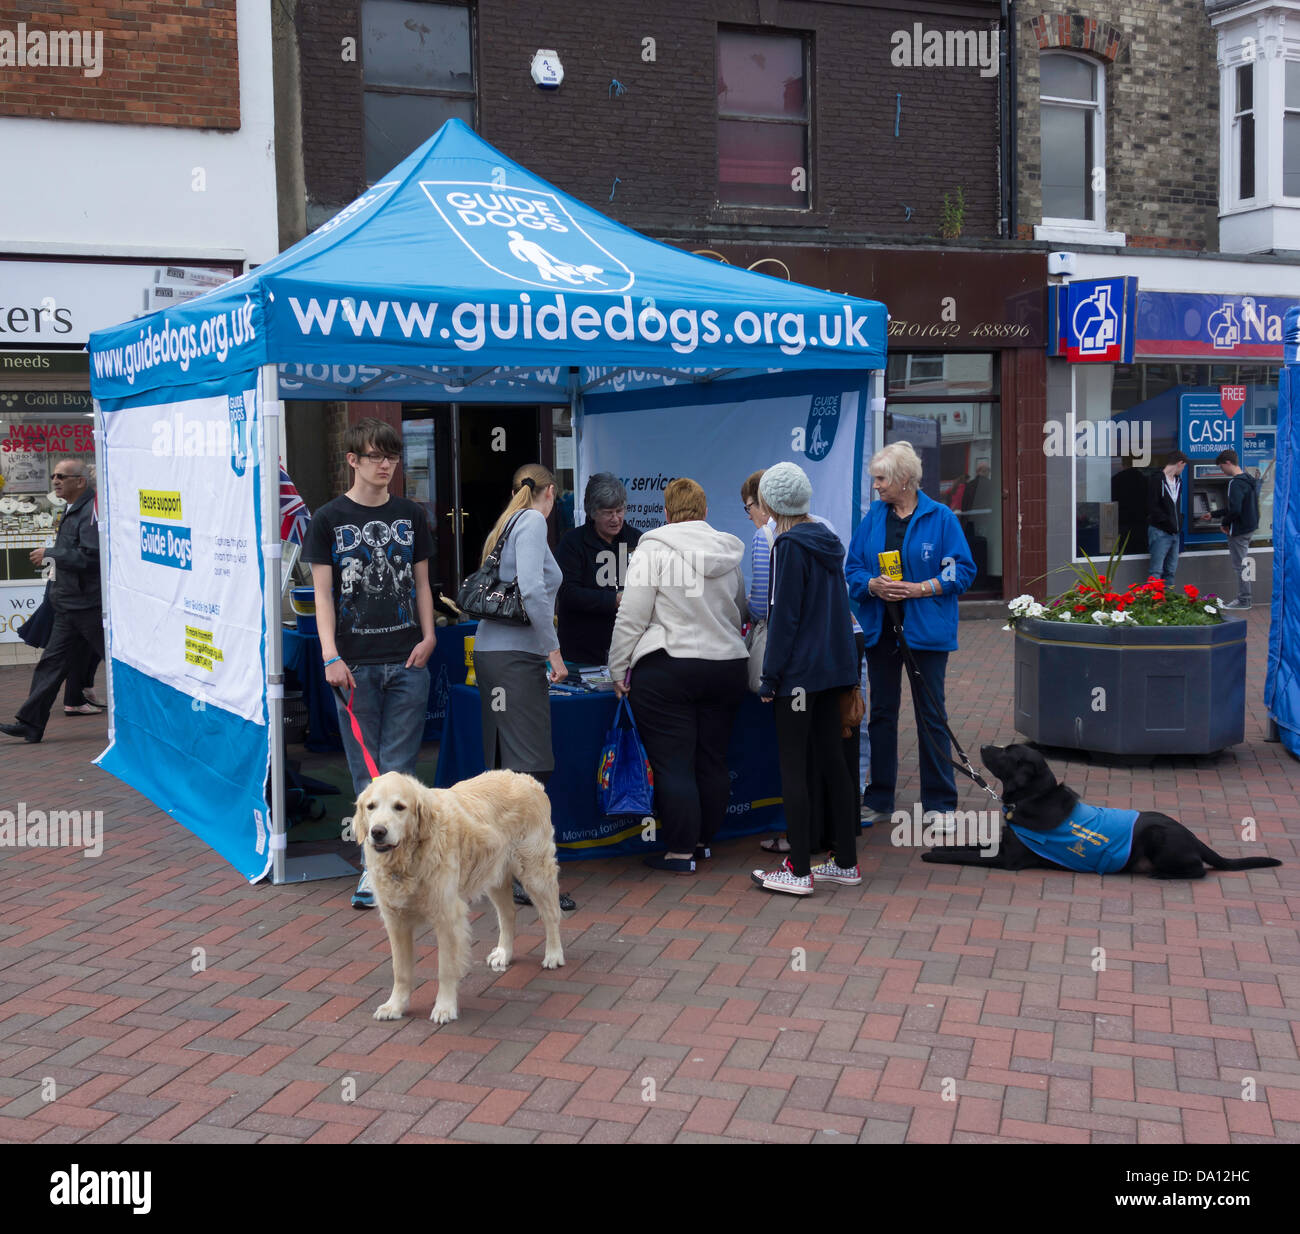 Display for the Charity Guide Dogs for the blind on a small town High Street in Summer Stock Photo